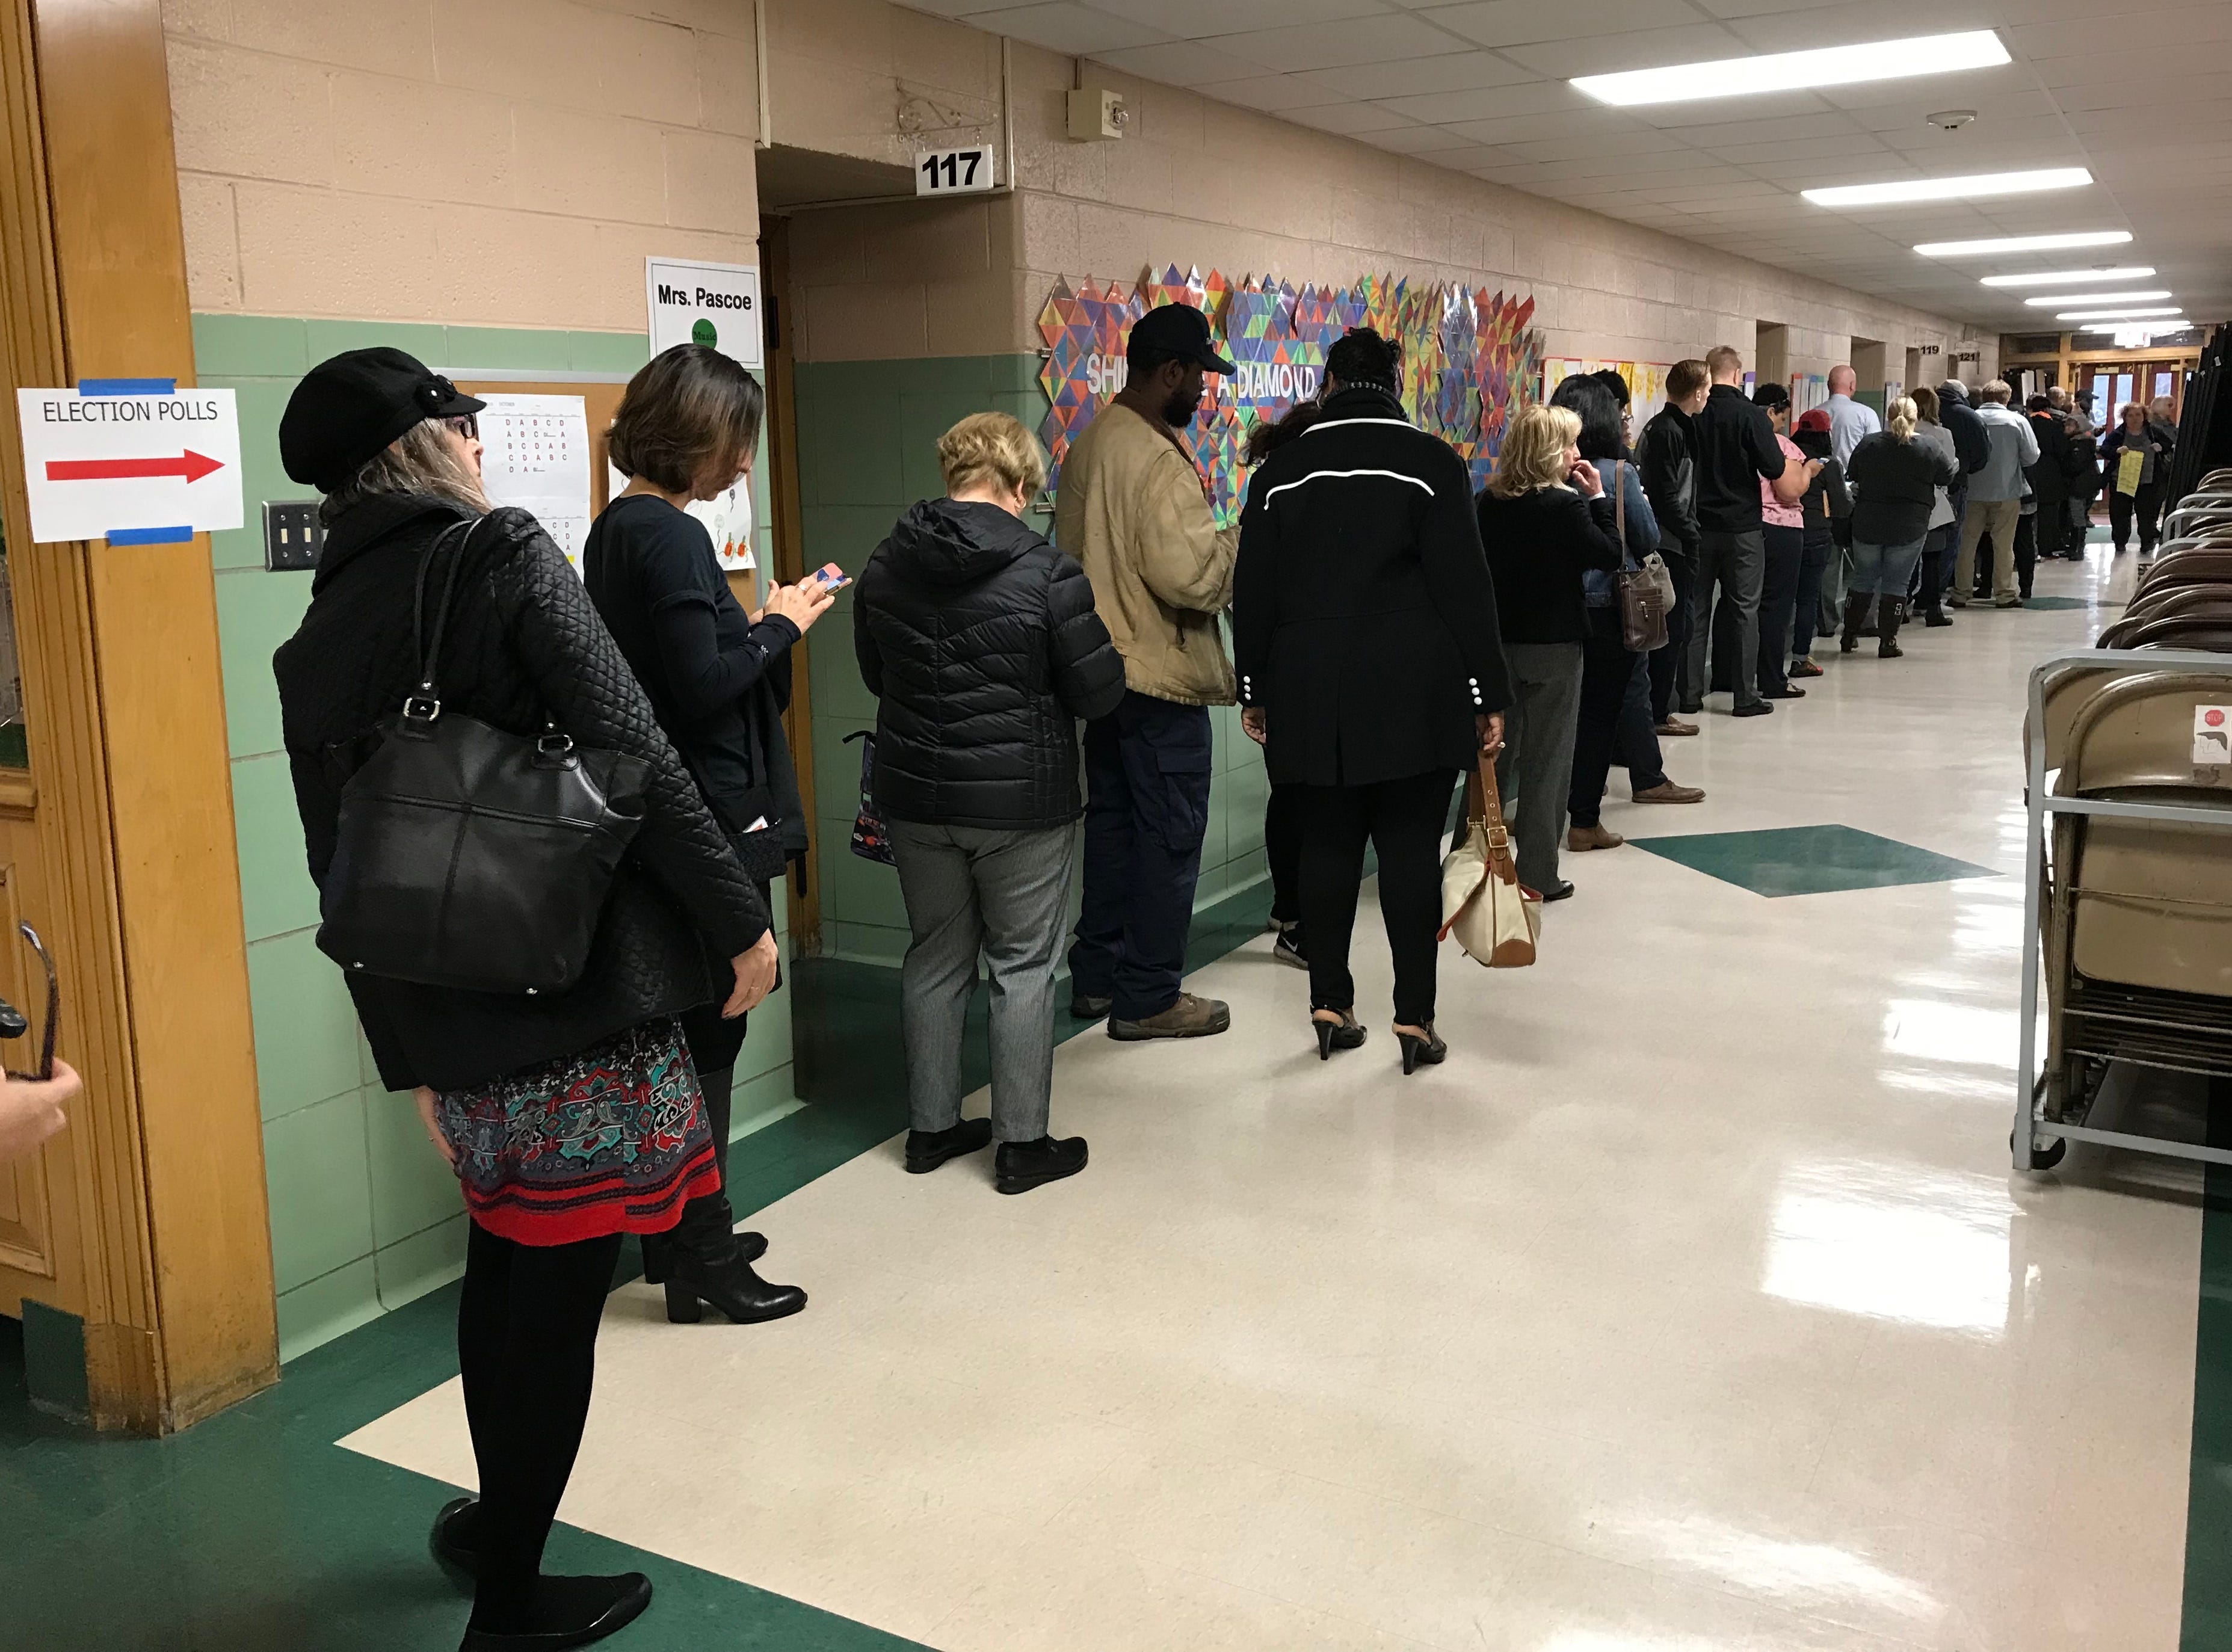 A line of voters wait in the hallway outside the gymnasium at Monteith Elementary School to cast their ballots in the midterm election on Tuesday, Nov. 6, 2018 in Grosse Pointe Woods.